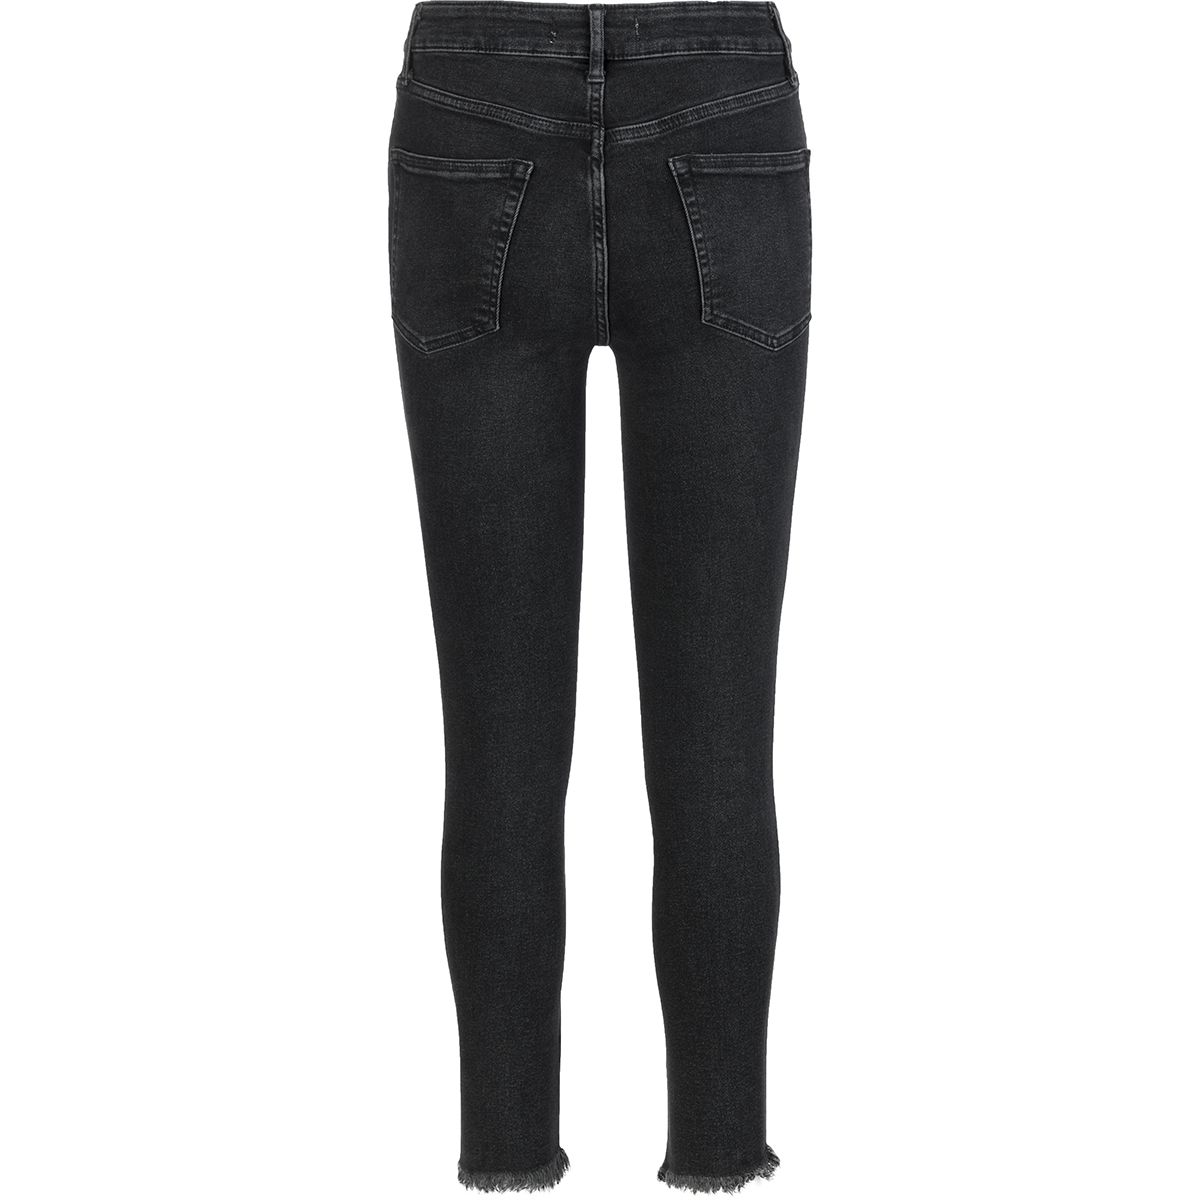 Free People Raw High Rise Jegging - Women's | Backcountry.com